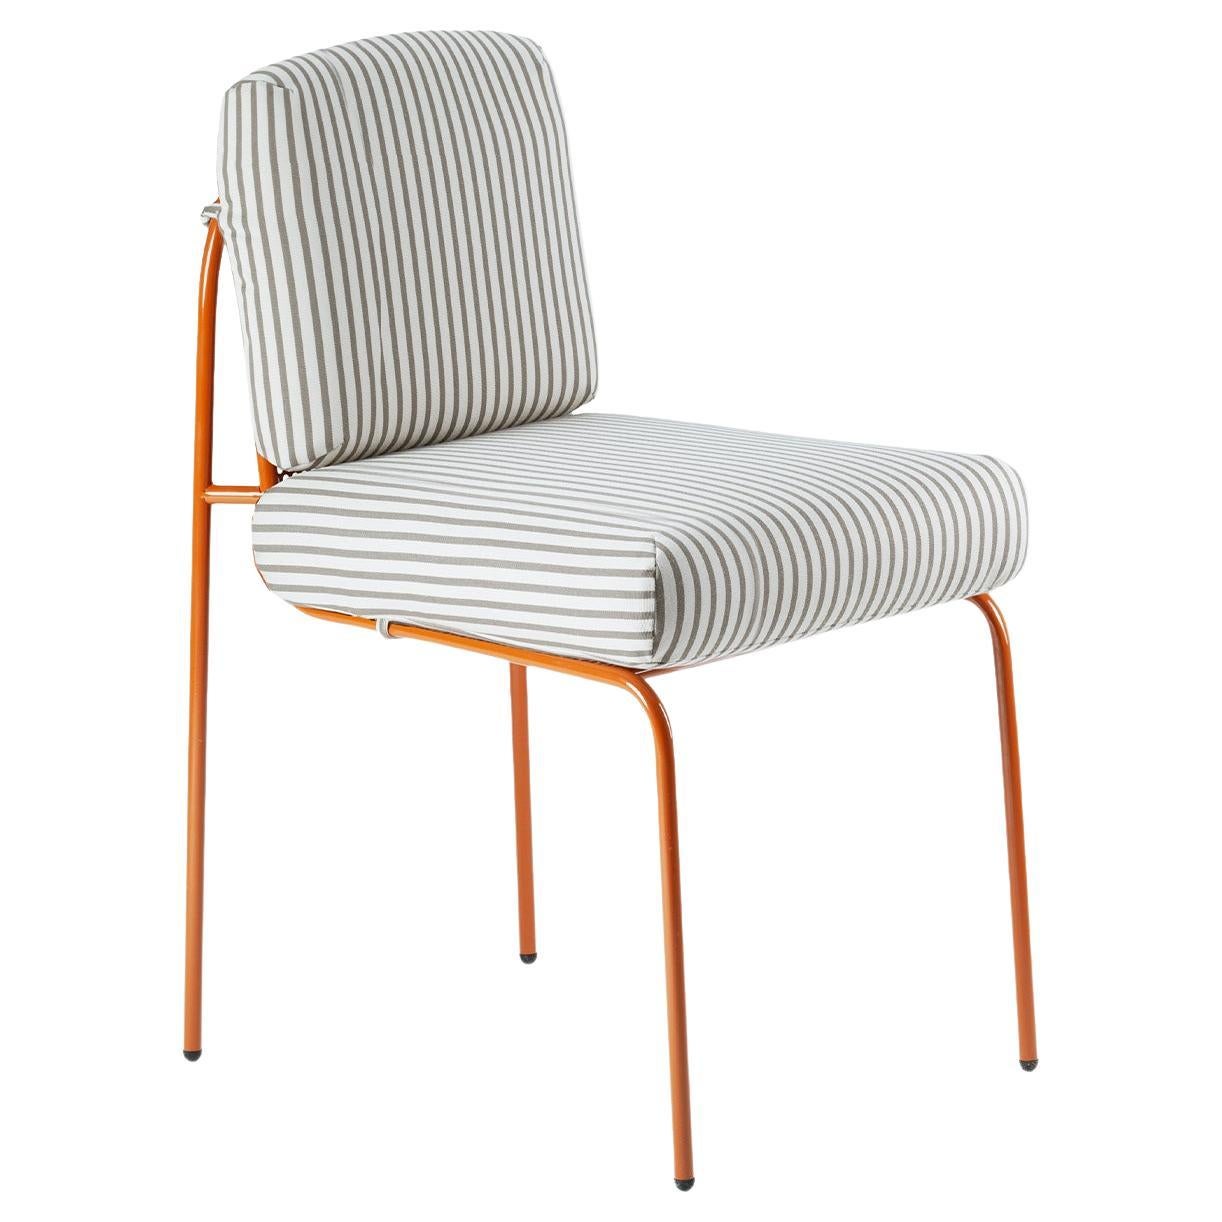 Contemporary Riviera Chair in Lacquered Salmon metal for Outdoors